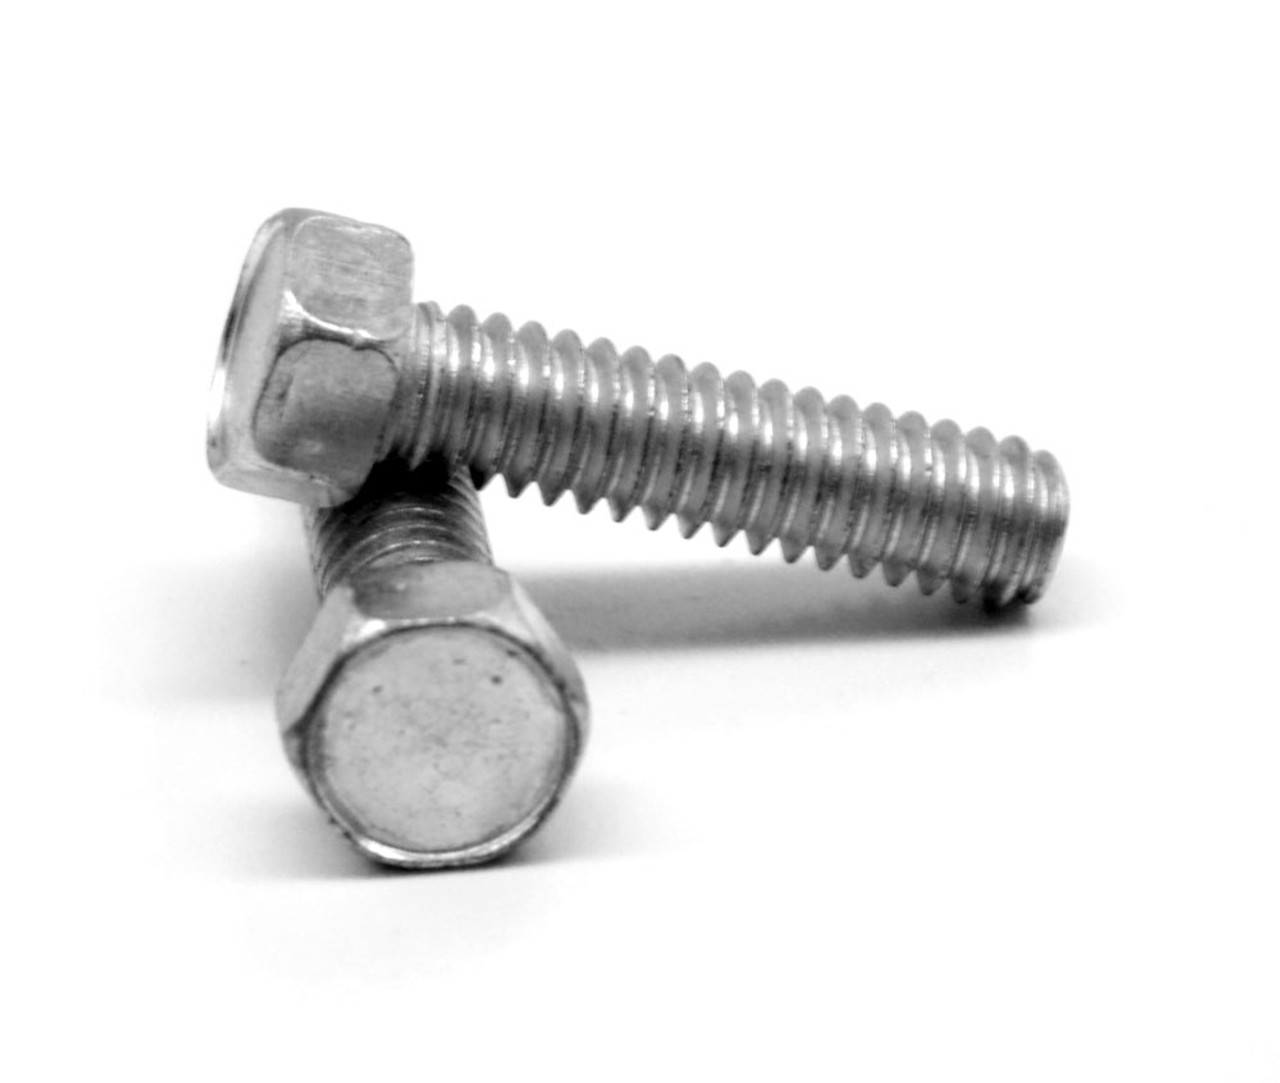 18-8 Stainless Hex Washer Head Slotted Machine Screw 10-32 x 1/2" 100 pcs 